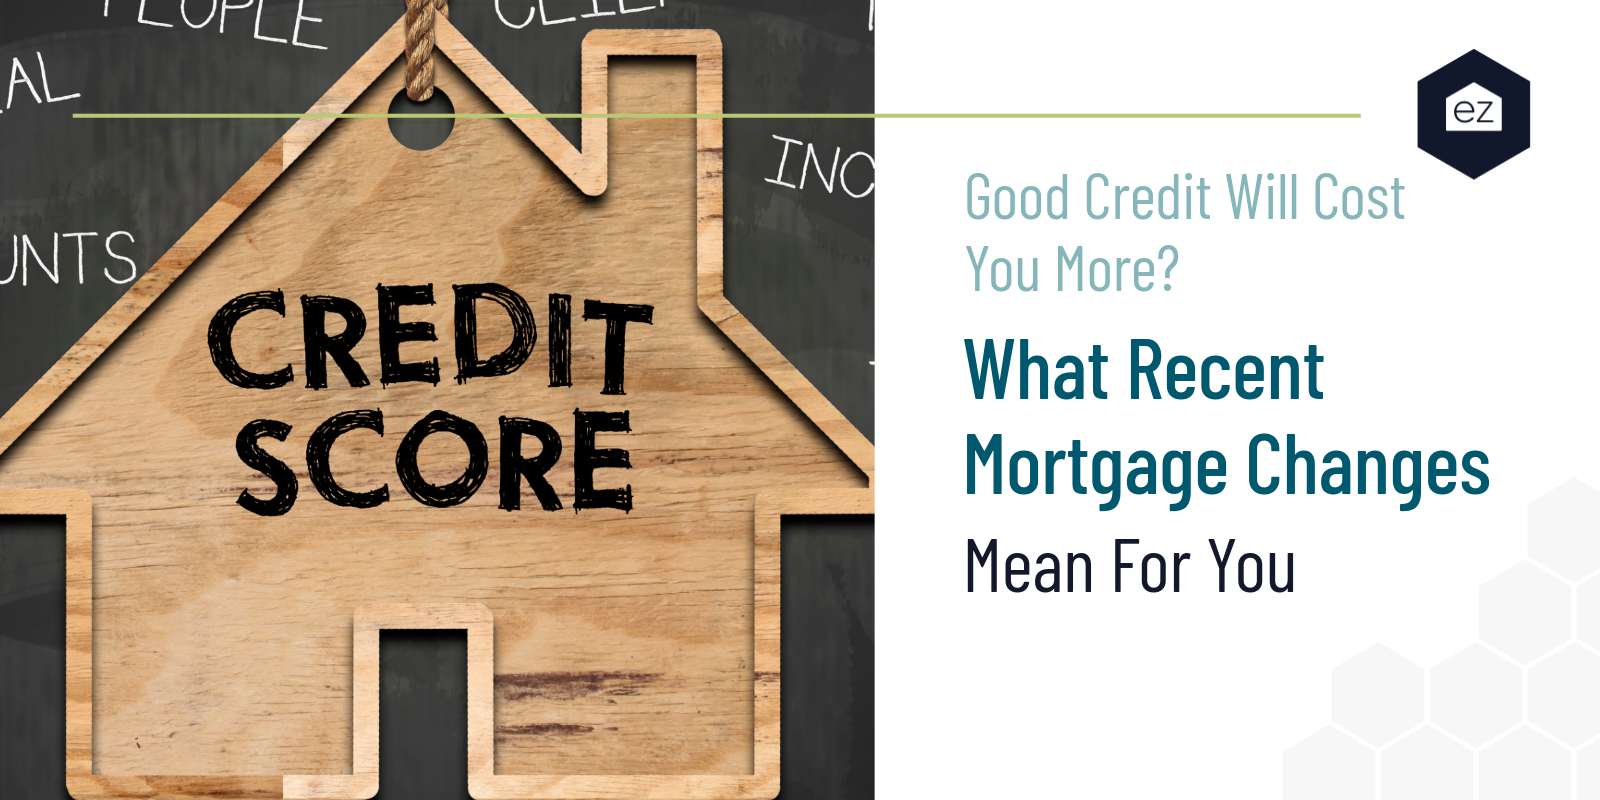 Credit Score and Mortgage Changes